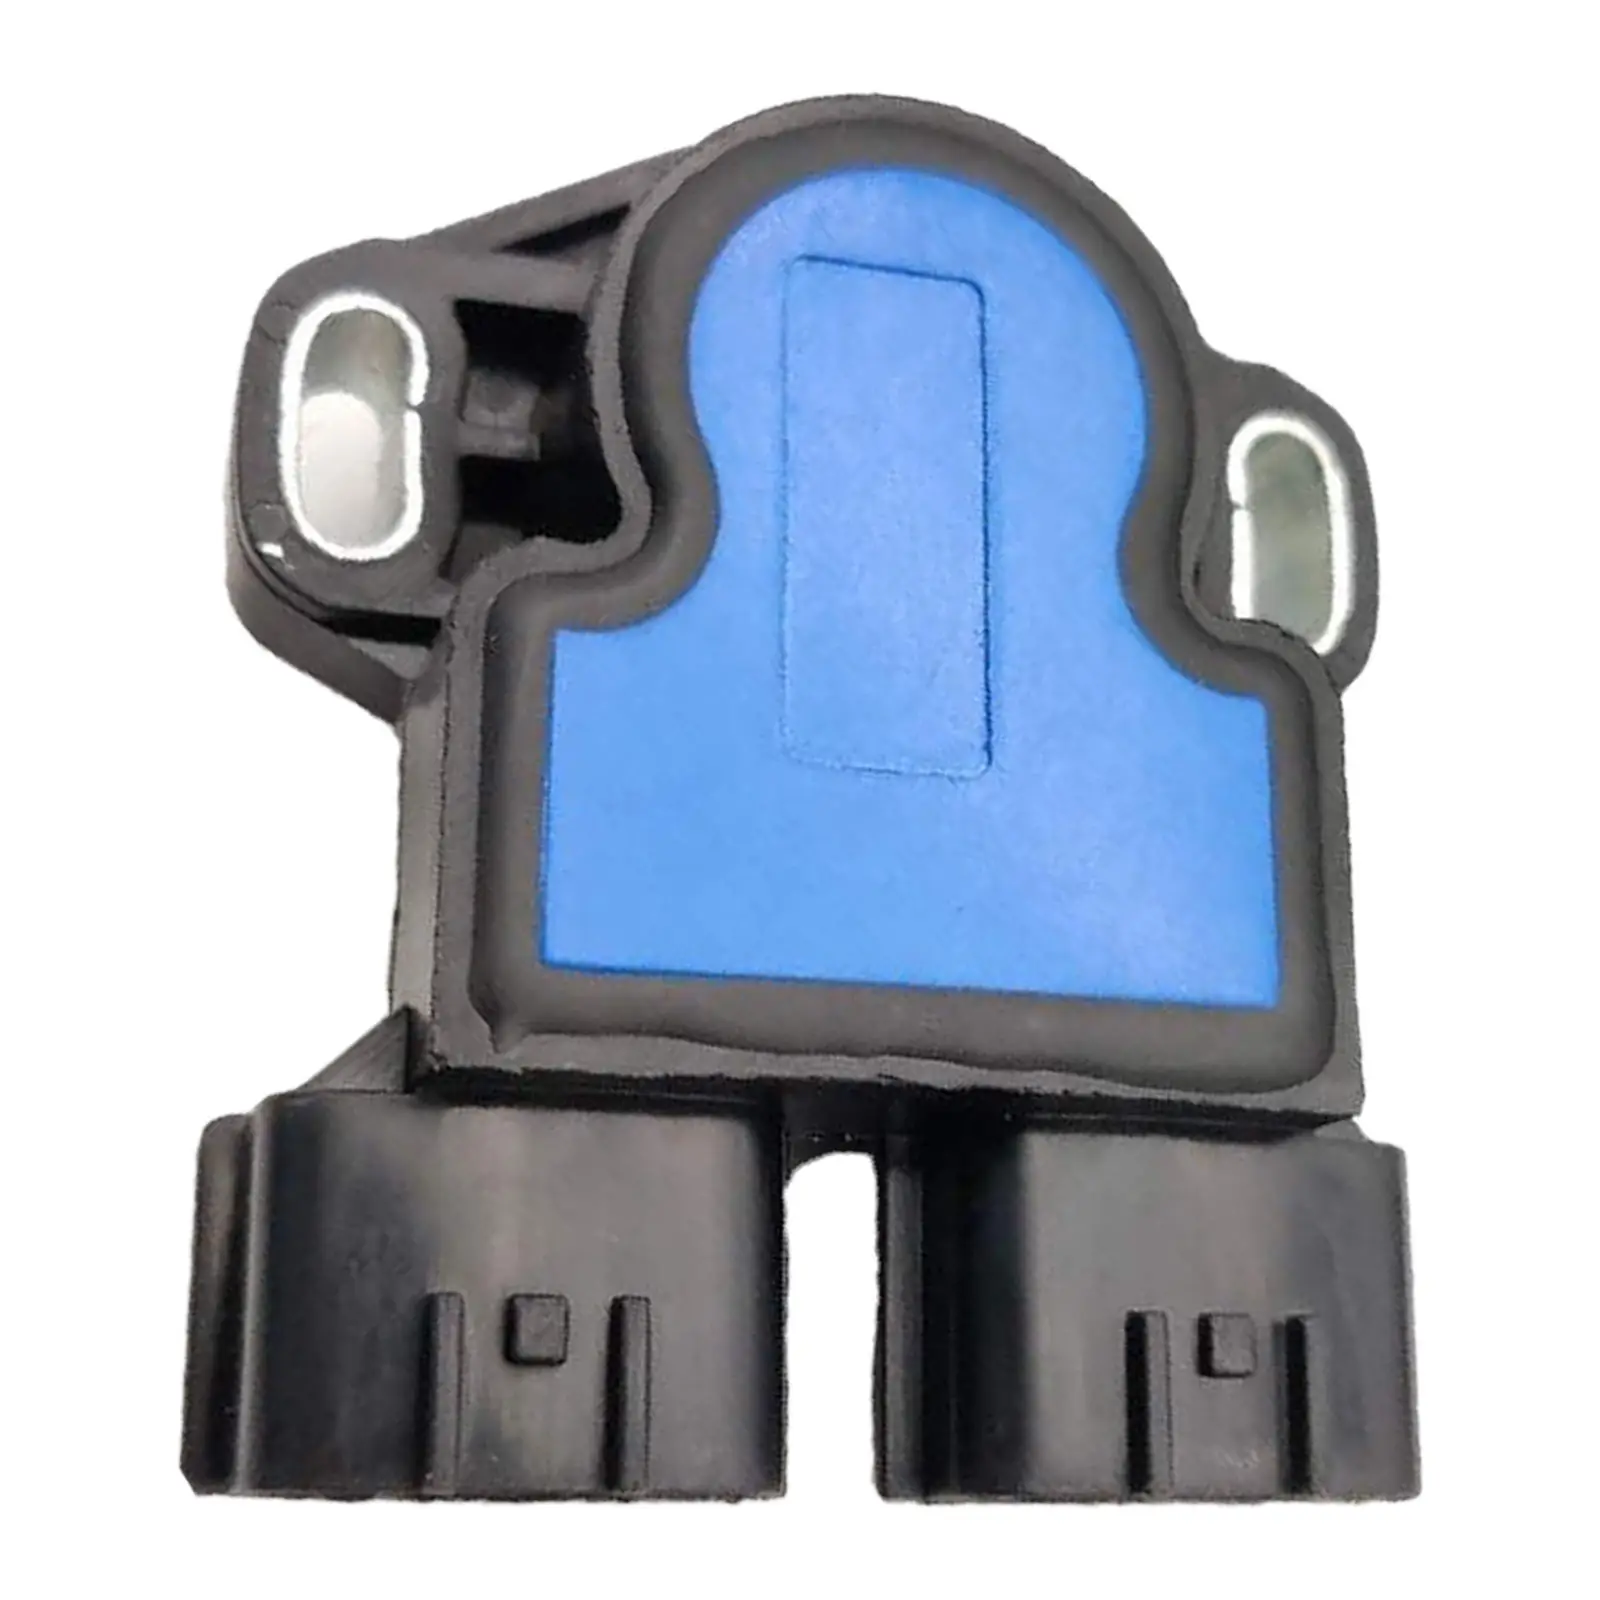 Throttle Position Sensor Fits for Nian Xterra Frontier Engine SERA486-07 8971631640 Replacement Acceories